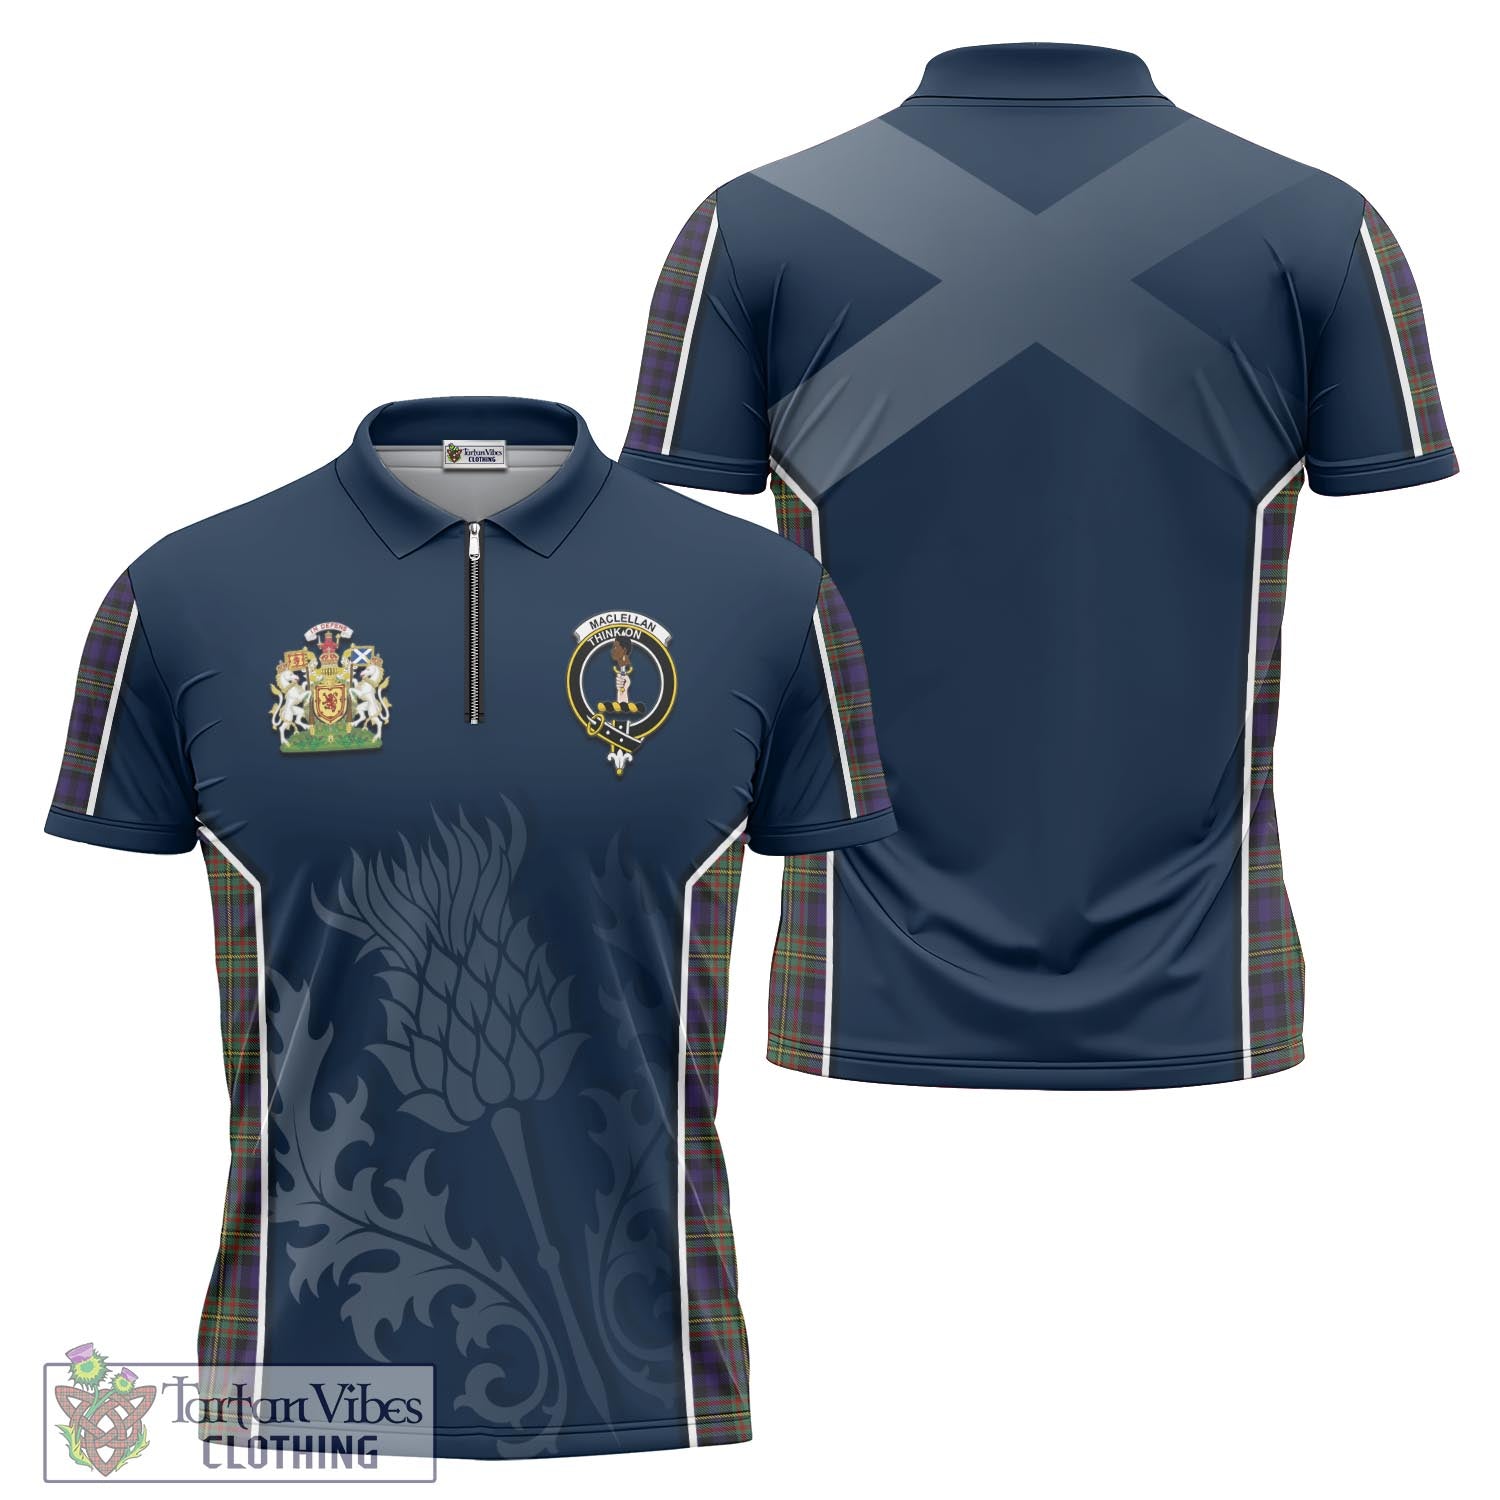 Tartan Vibes Clothing MacLellan Tartan Zipper Polo Shirt with Family Crest and Scottish Thistle Vibes Sport Style